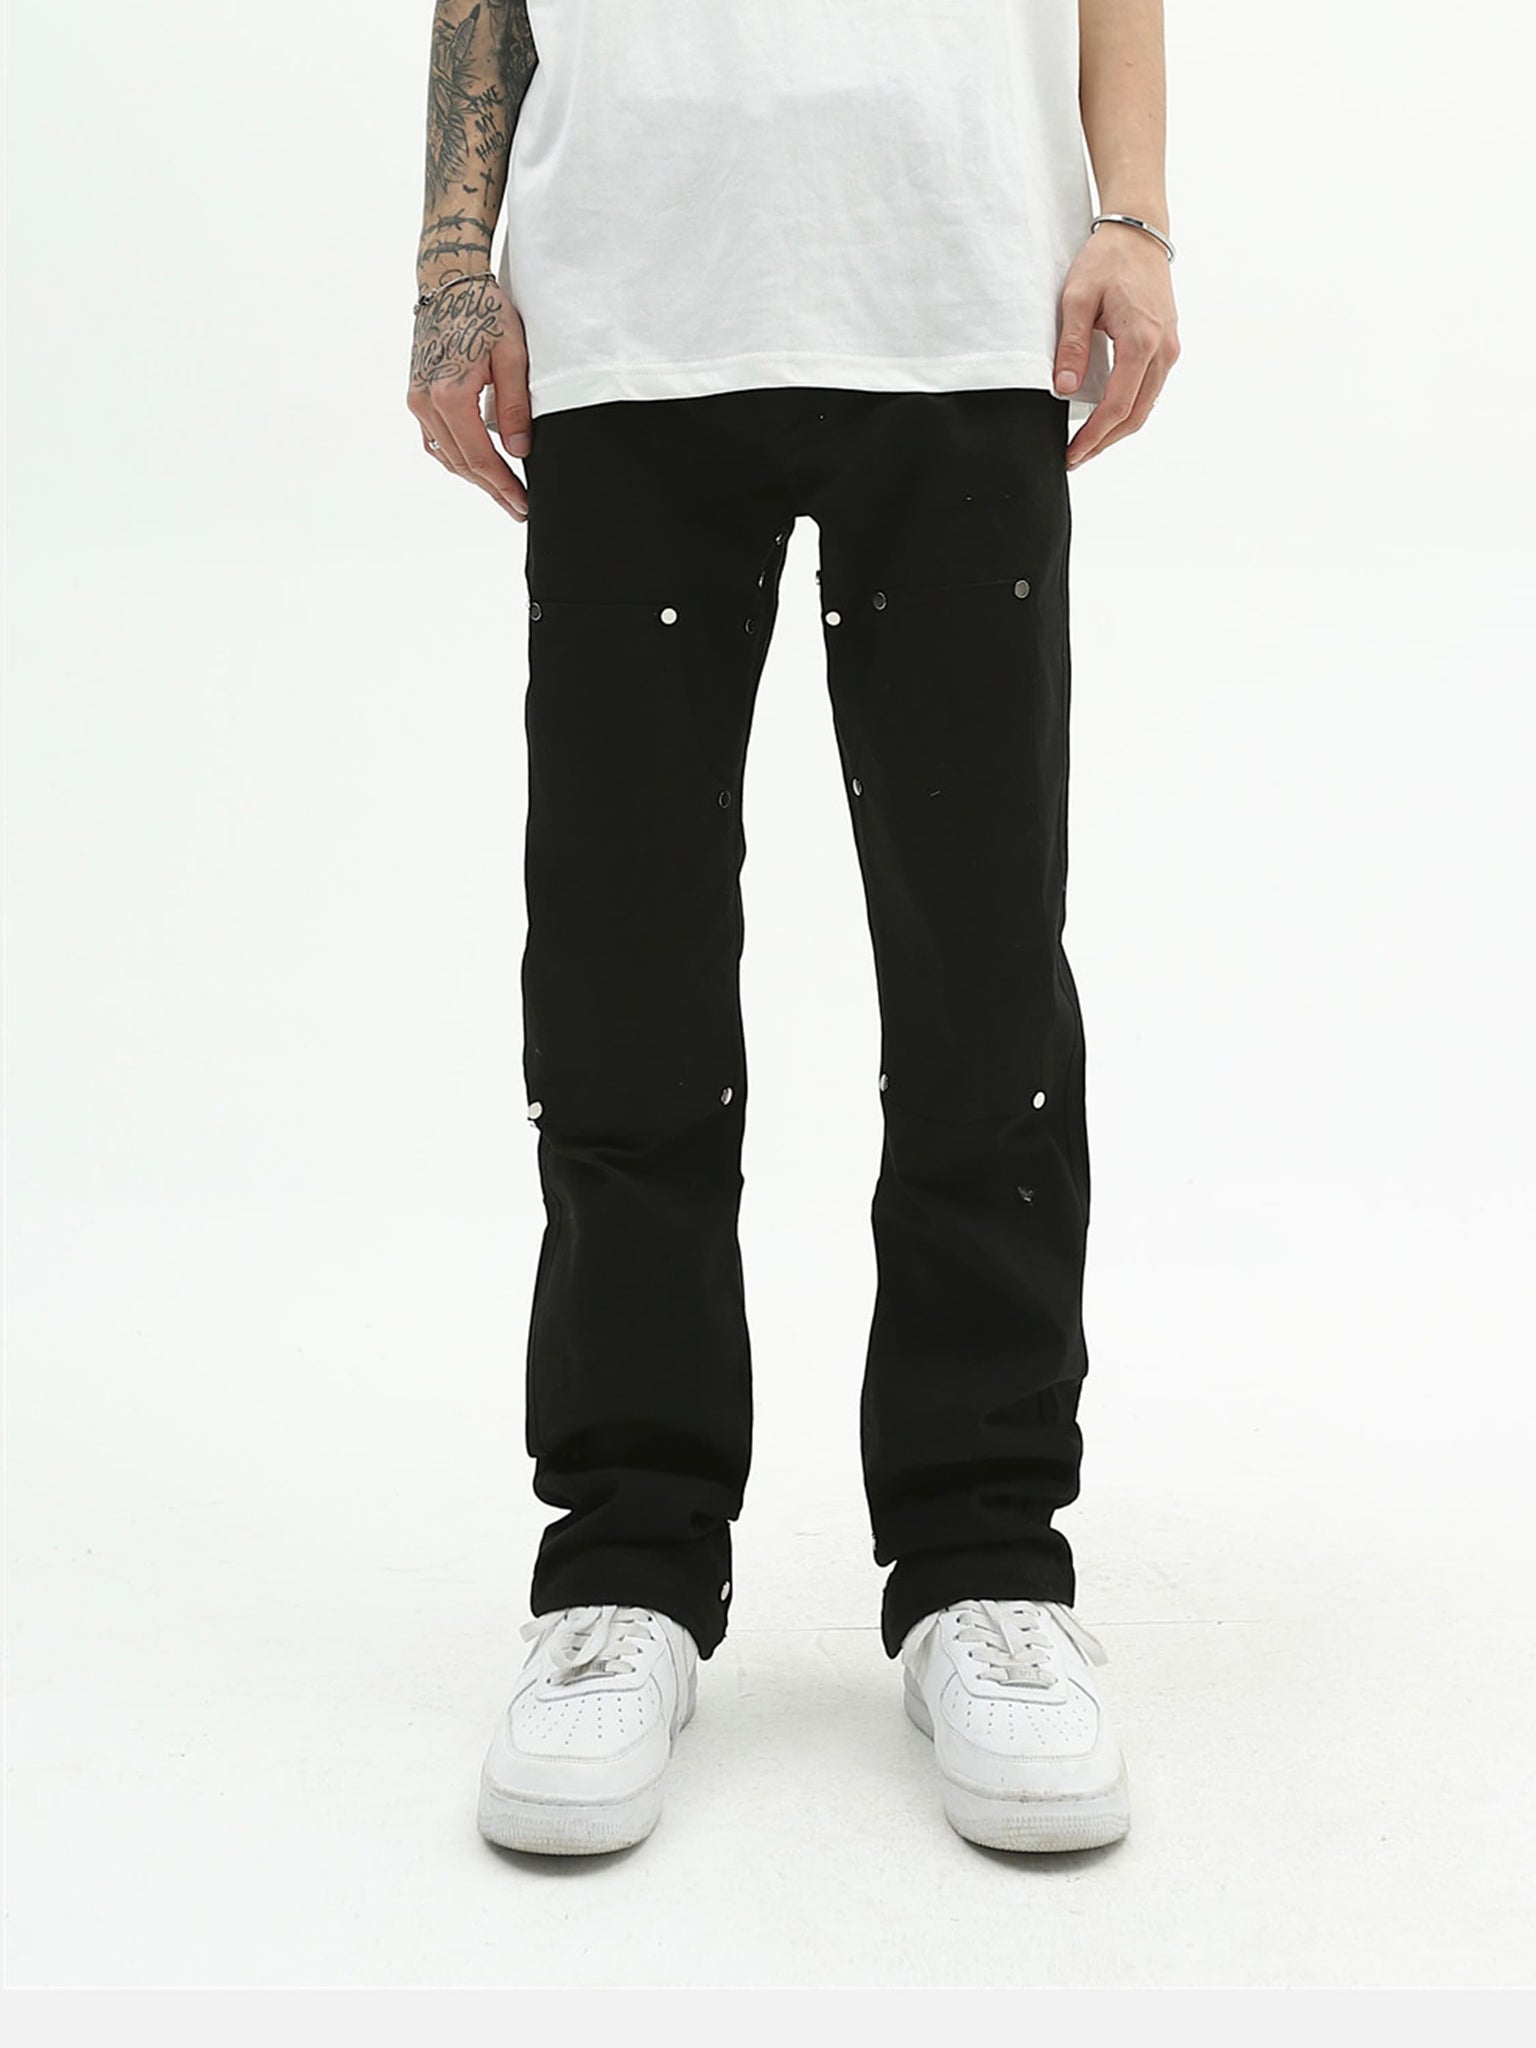 Thesupermade American High Street Digital Embroidered Jeans